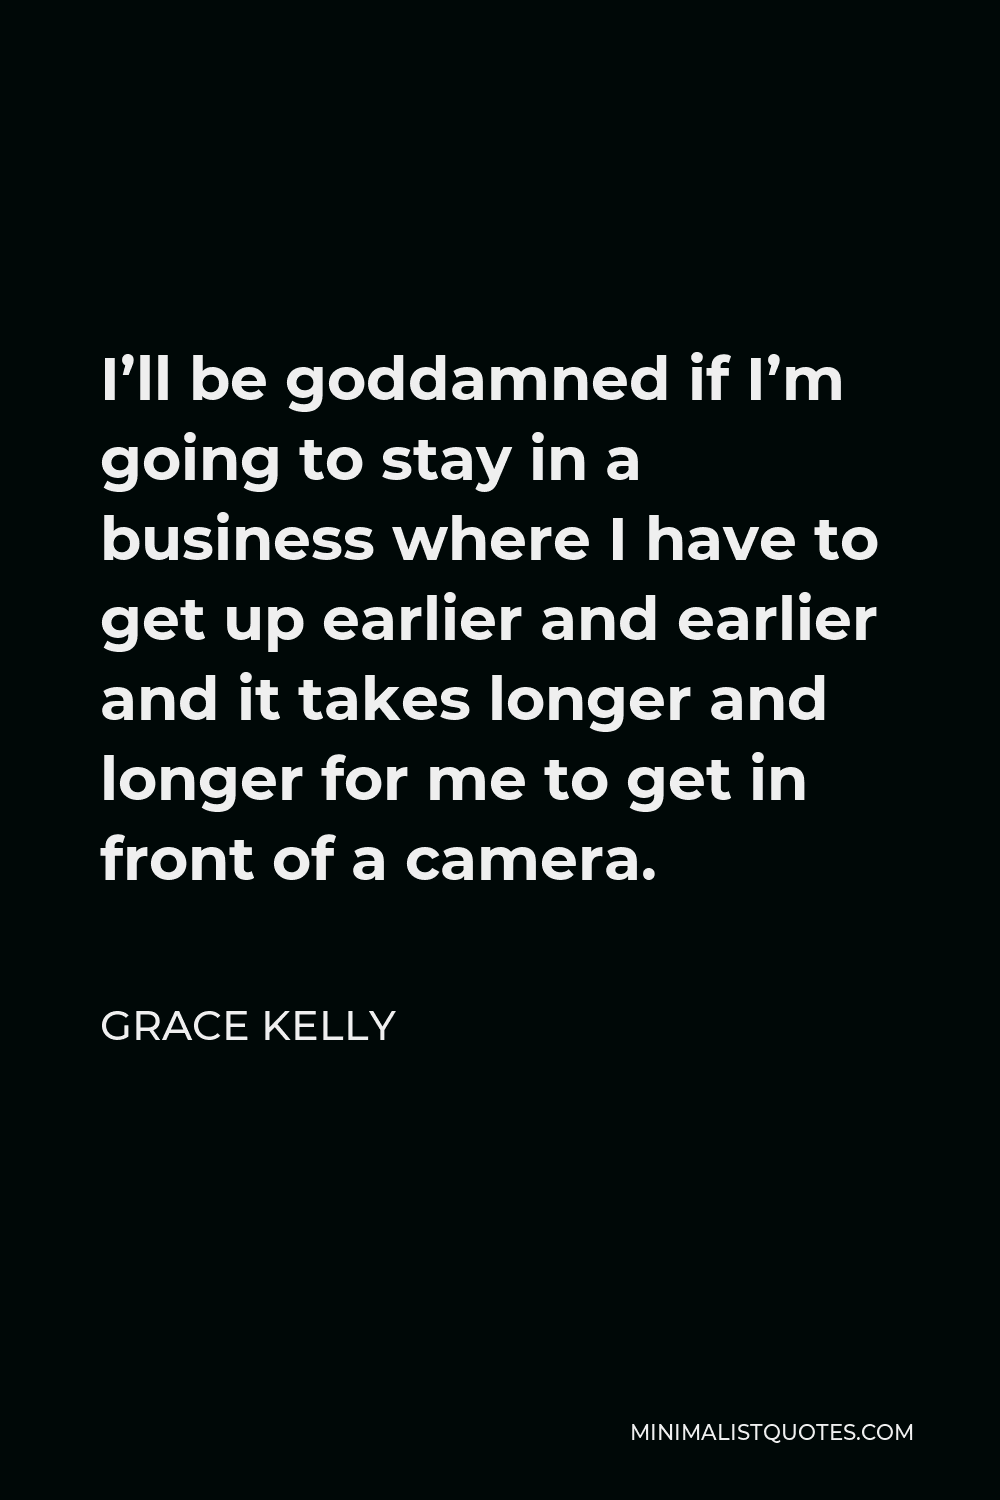 Grace Kelly Quote - I’ll be goddamned if I’m going to stay in a business where I have to get up earlier and earlier and it takes longer and longer for me to get in front of a camera.